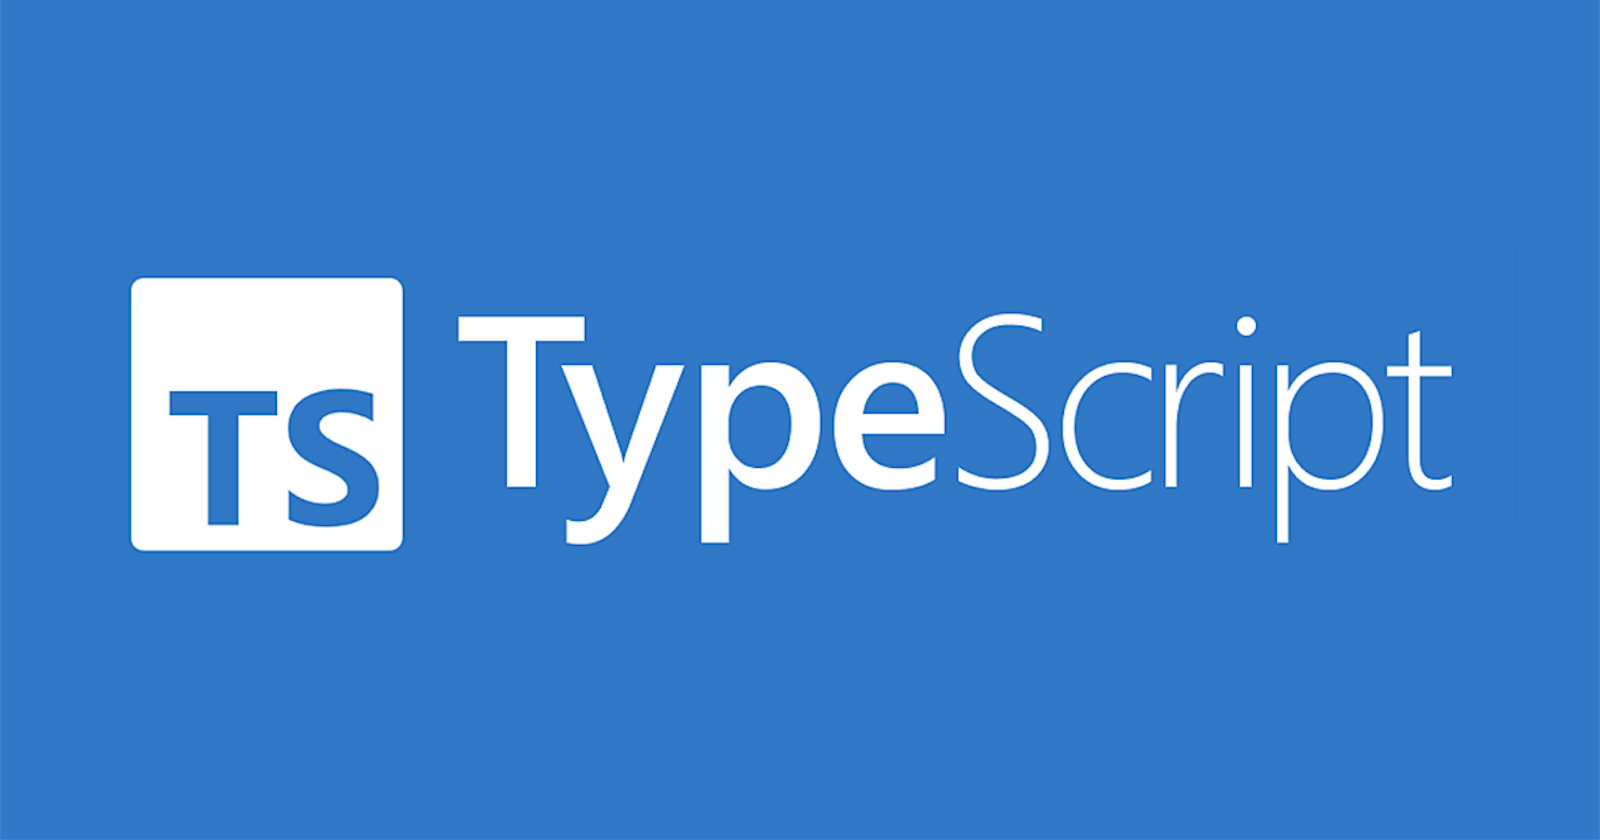 What Is Typescript